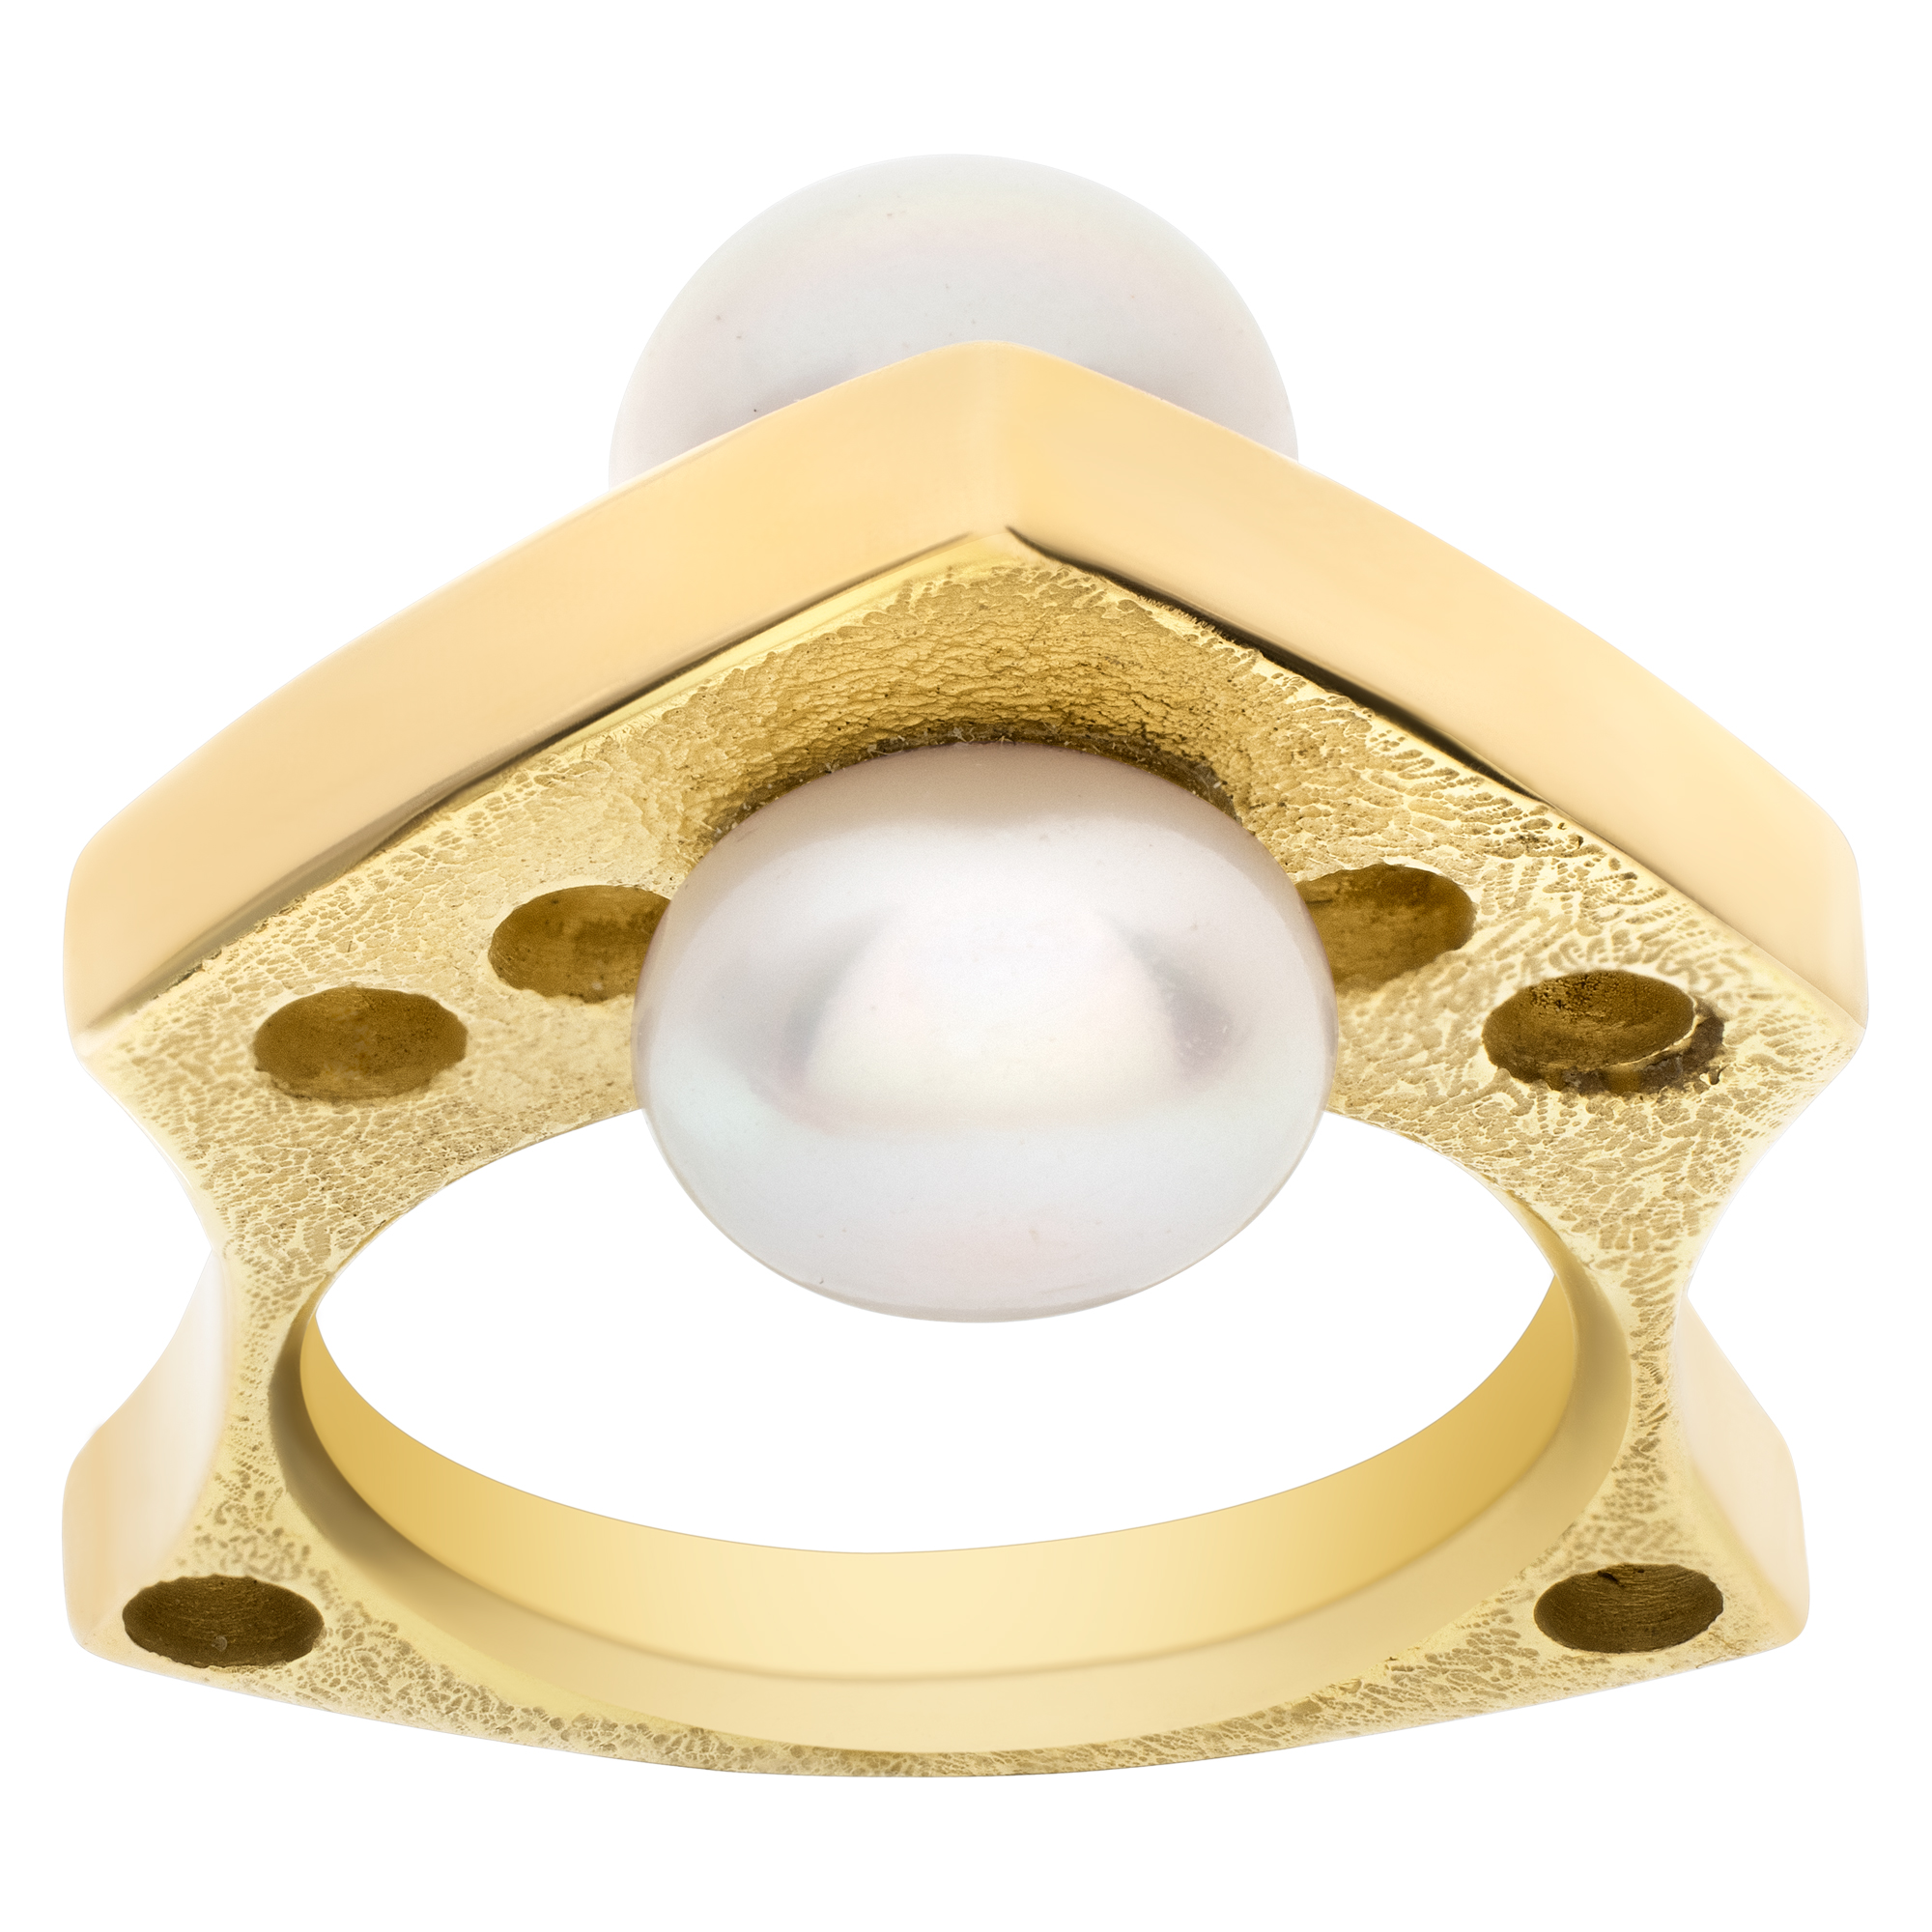 Unqiue Double pearl ring in 14k yellow gold. Size 6.25 image 1